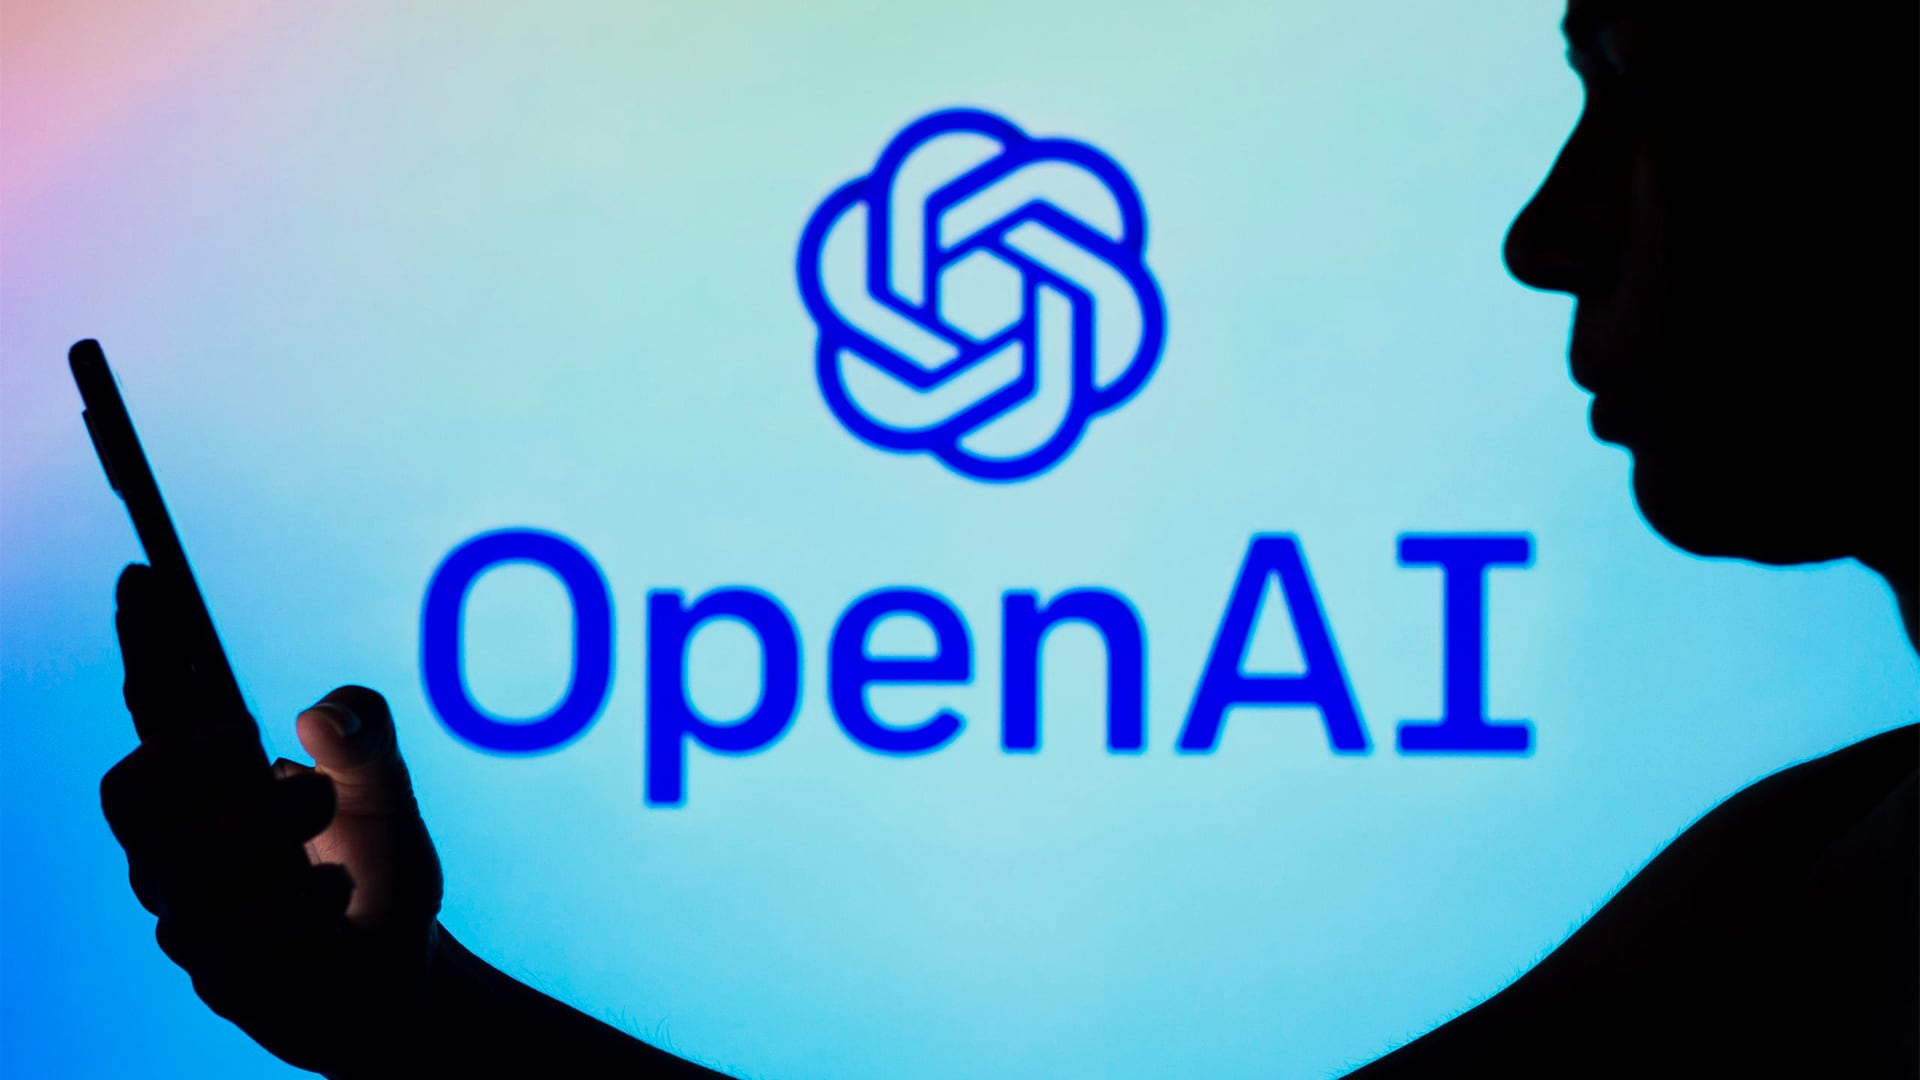 OpenAI/Microsoft: buying startup would be intelligent move for giant